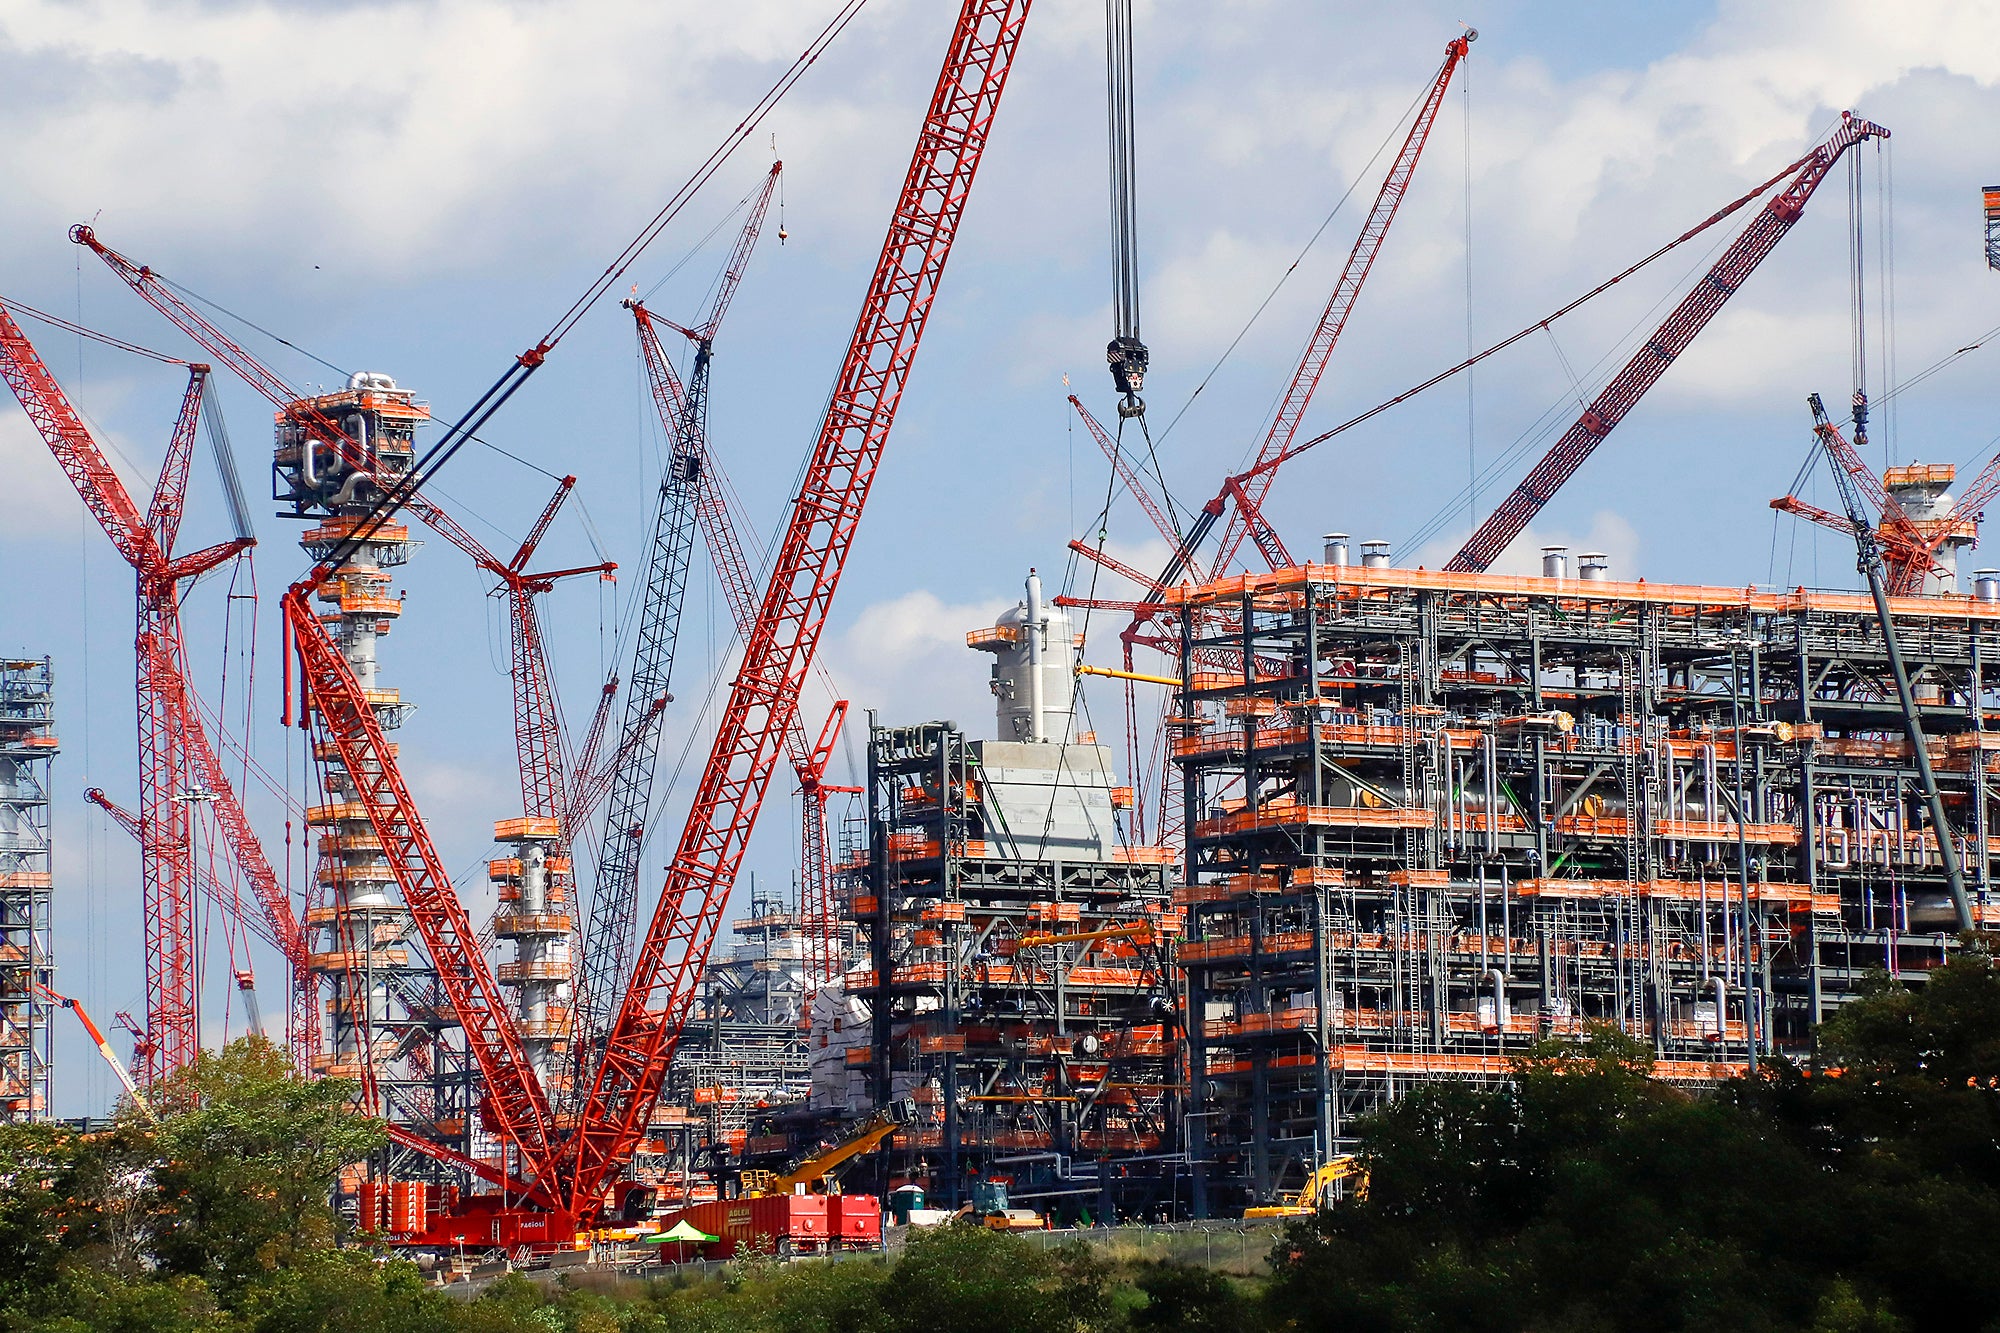 Cranes are seen as they work on construction of the Shell Pennsylvania Petrochemicals Complex and ethylene cracker plant located in Potter Township, Pa, from across the Ohio River, in this file photo from, Oct. 3, 2019, in Industry, Pa.